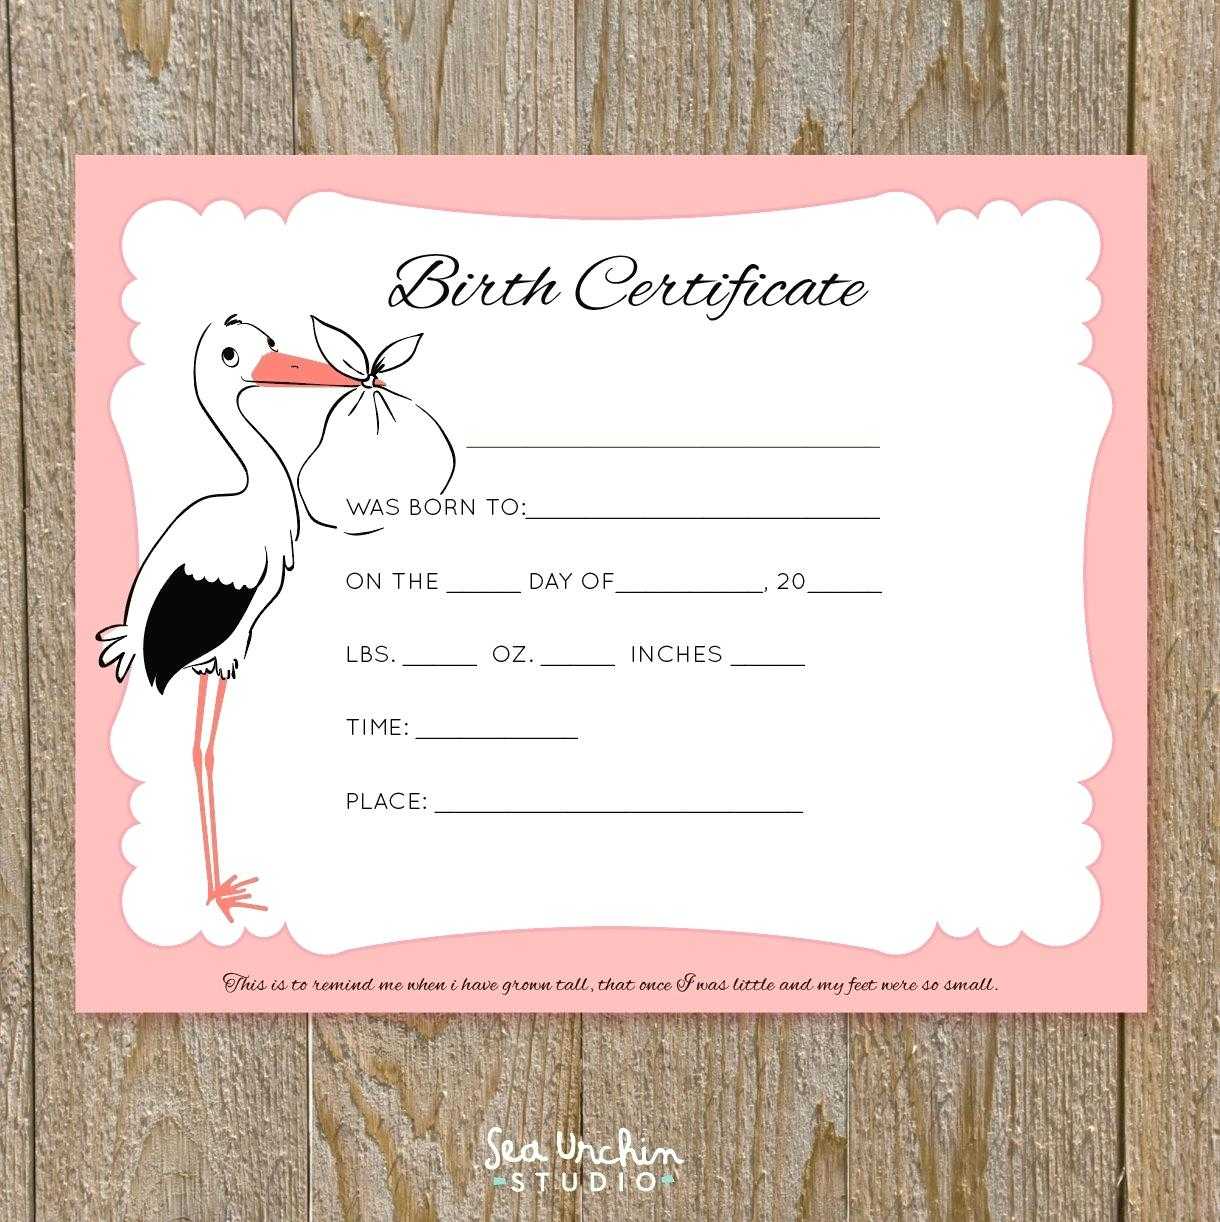 Baby Doll Birth Certificate Template Or With Free Printable Pertaining To Baby Doll Birth Certificate Template